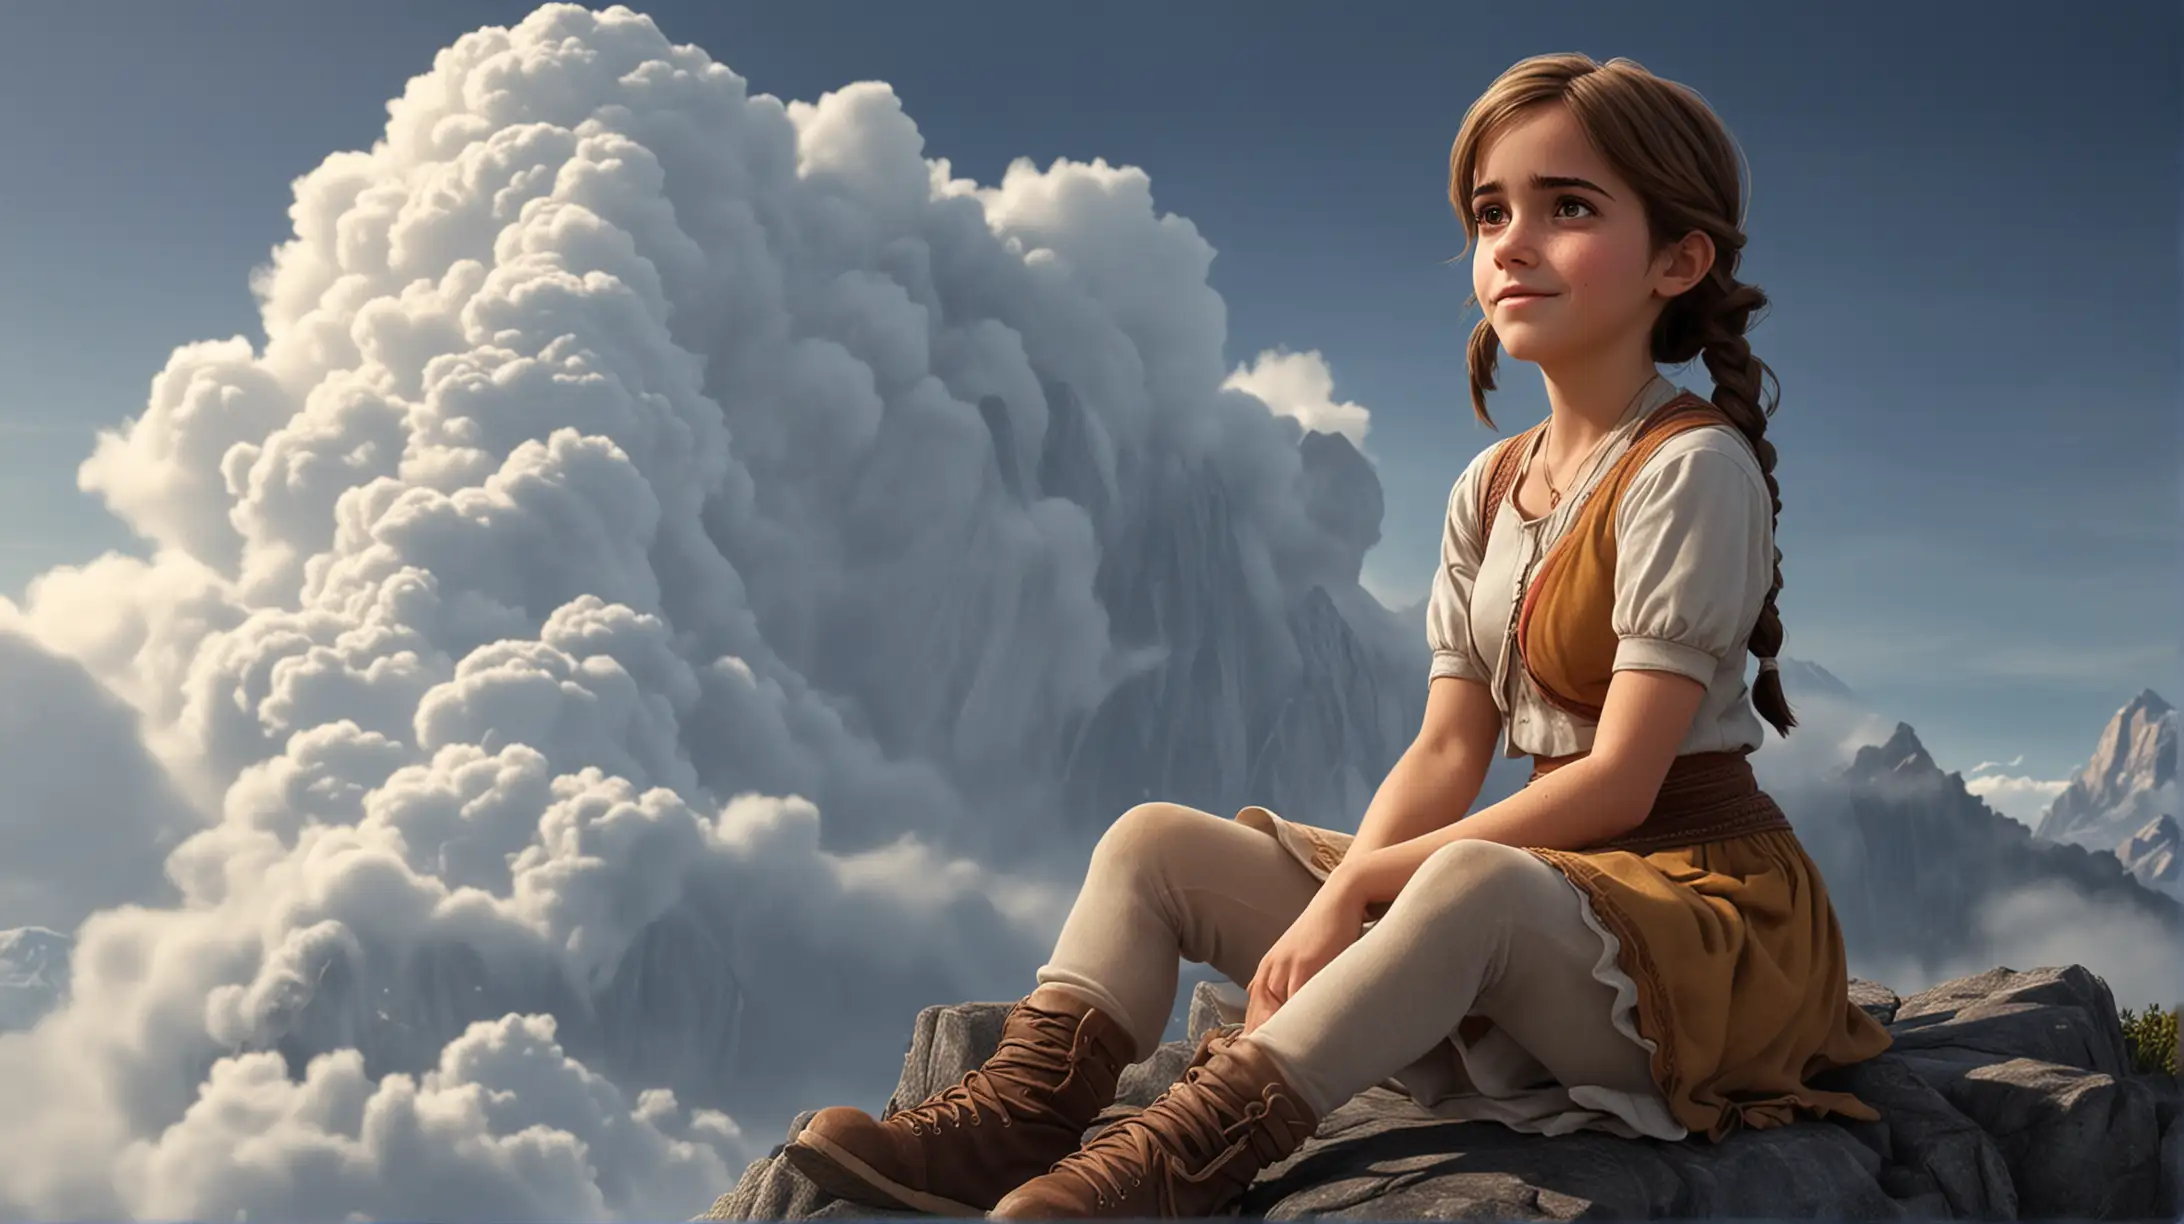 cartoon, Emma Watson as indian girl sit on top of a mountain, close-up, clouds, fog, pigtails